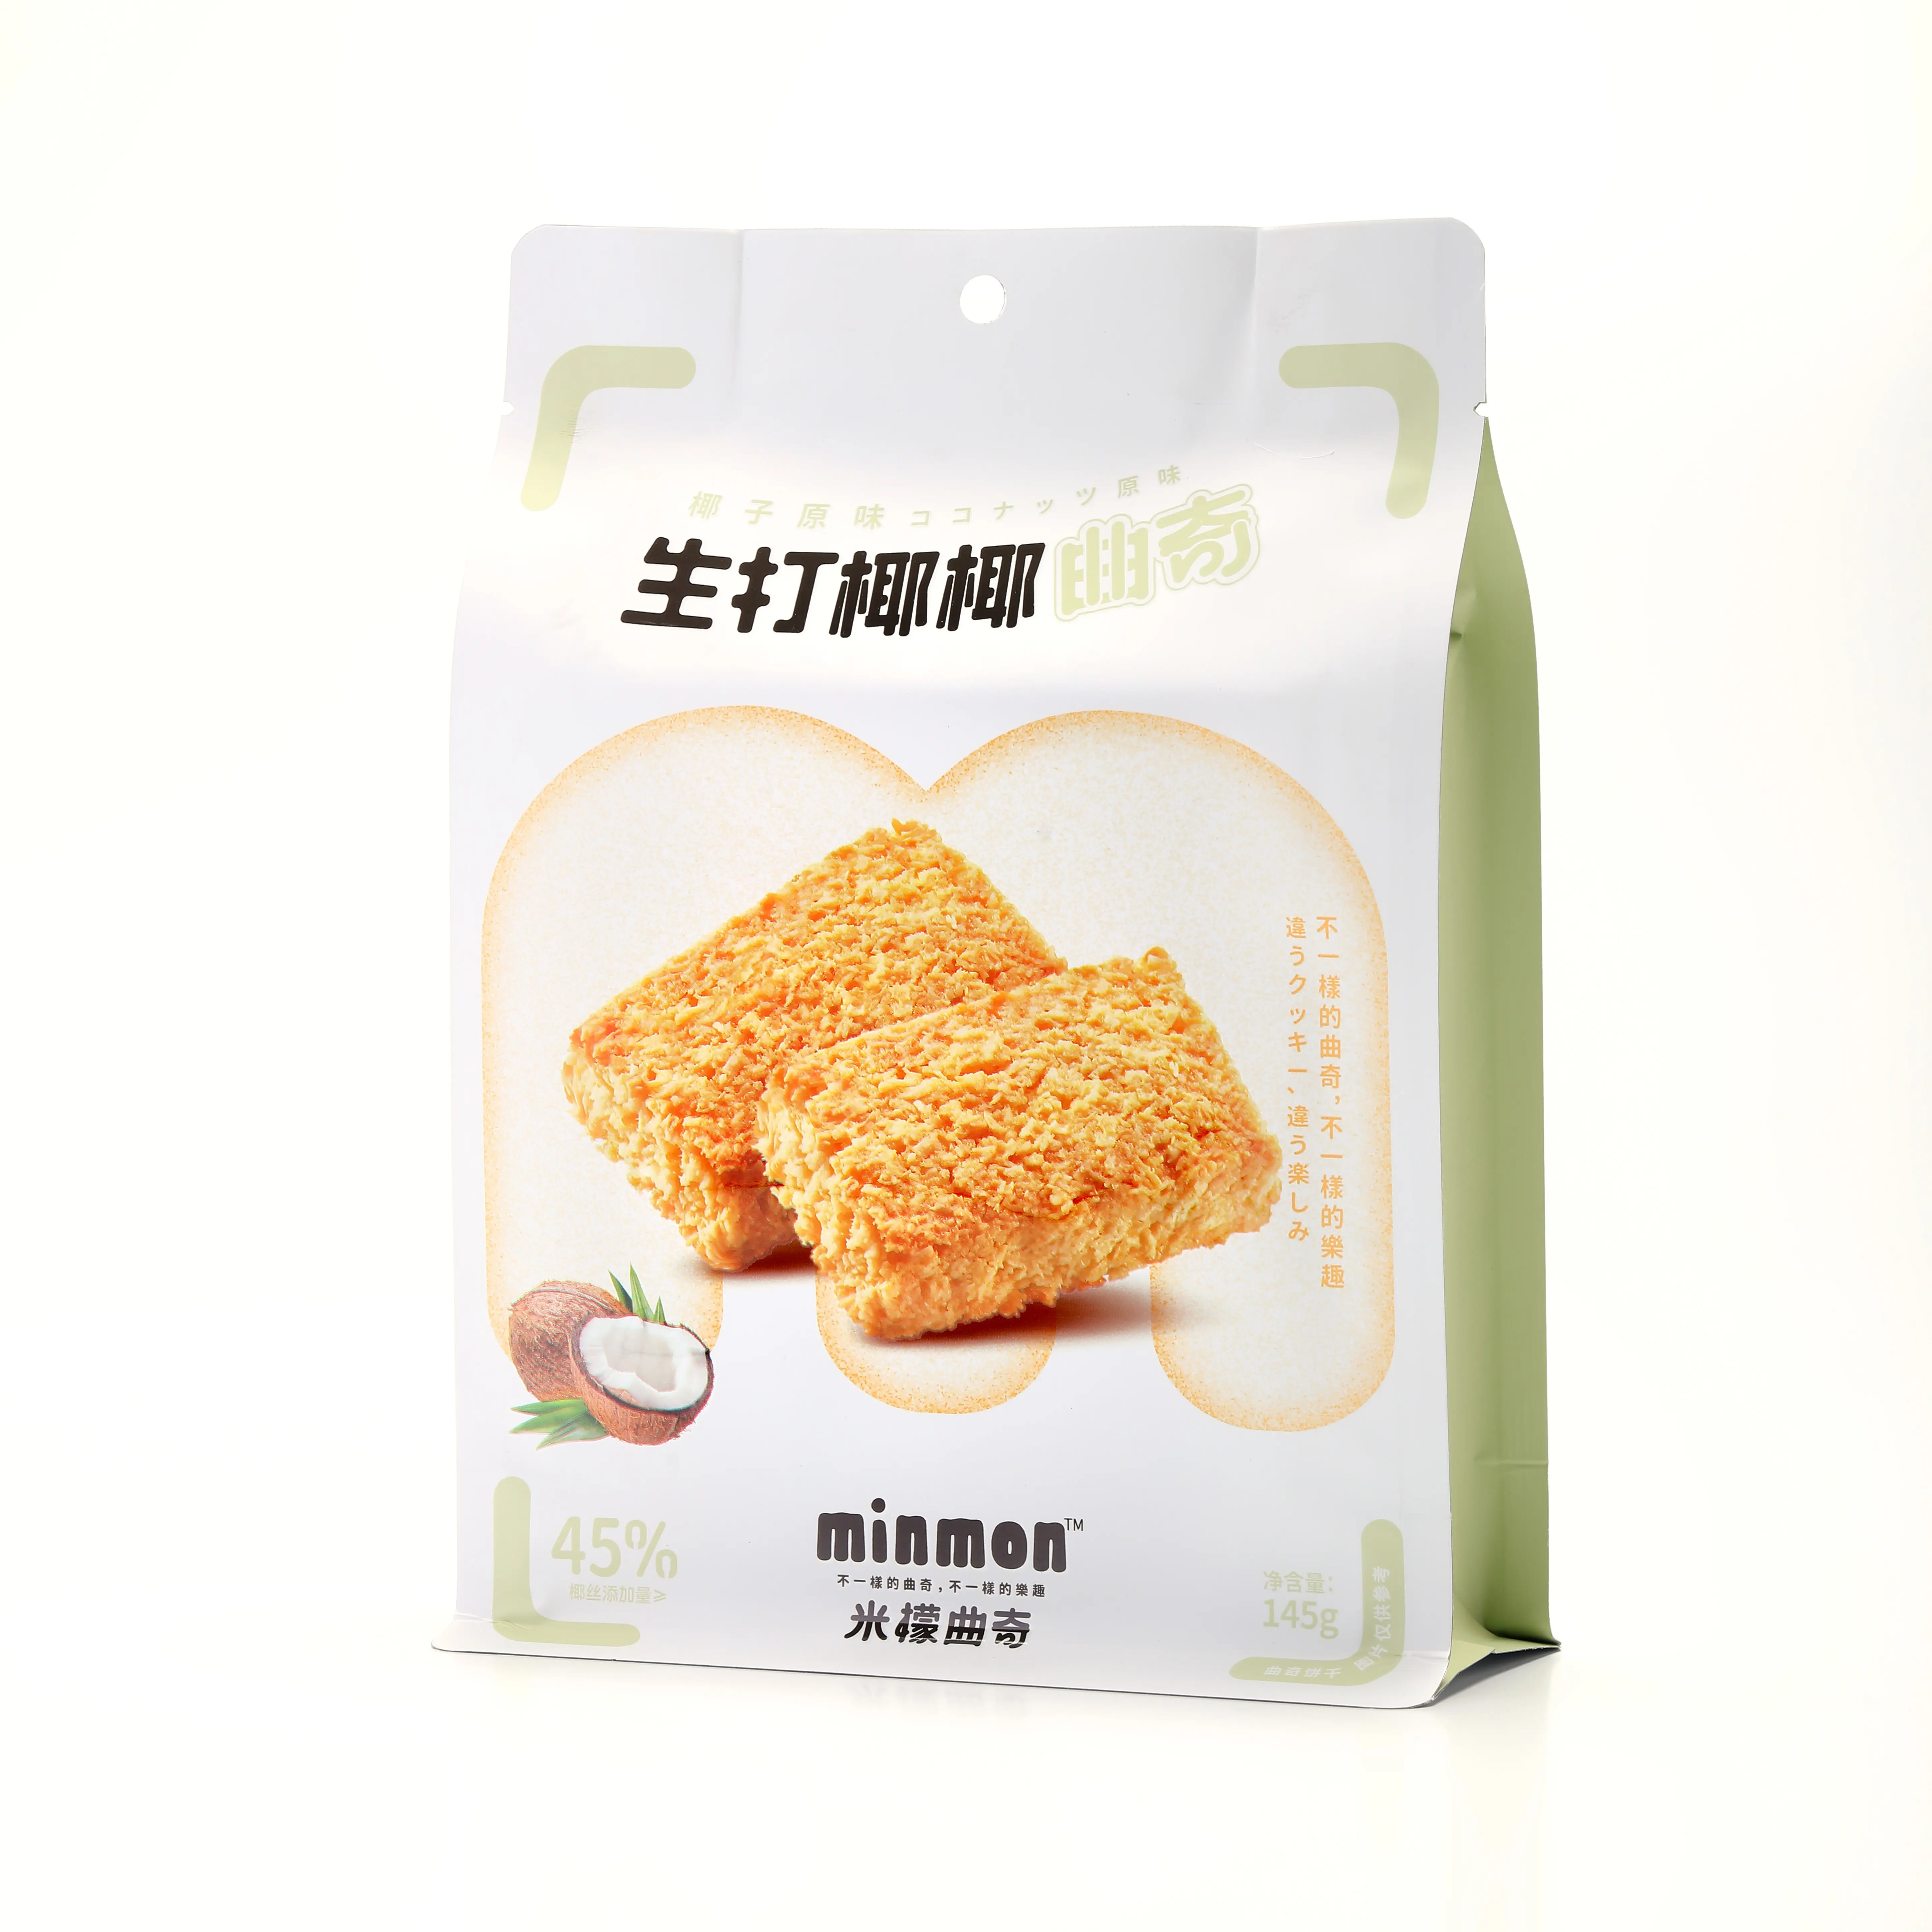 wholesale minmon Raw Coconut Cookies (Original Coconut Flavor) 145g*24bags chinese snack